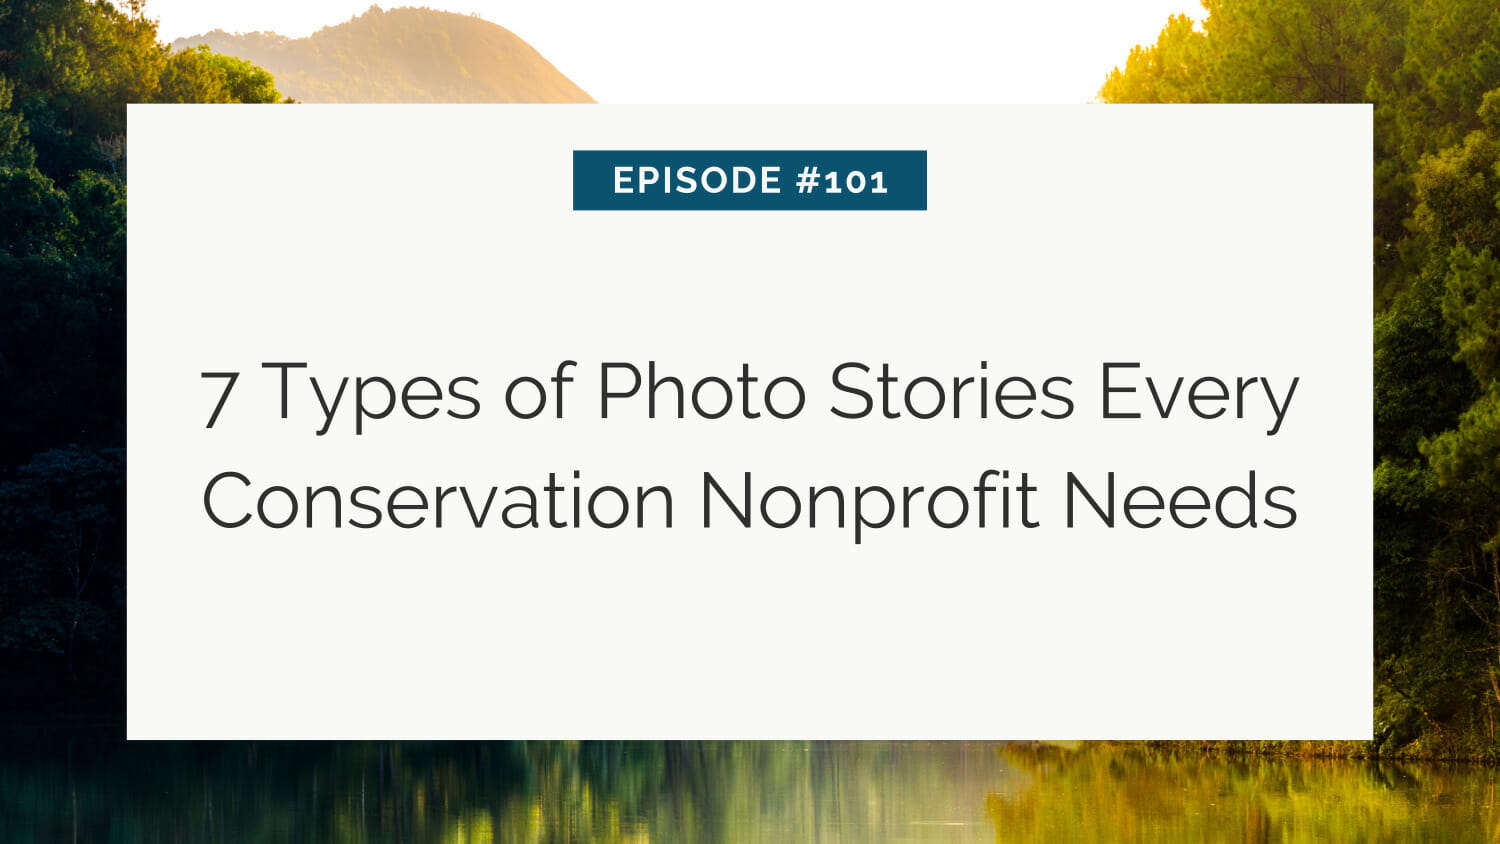 Promotional banner for episode #101 about "7 types of photo stories every conservation nonprofit needs.